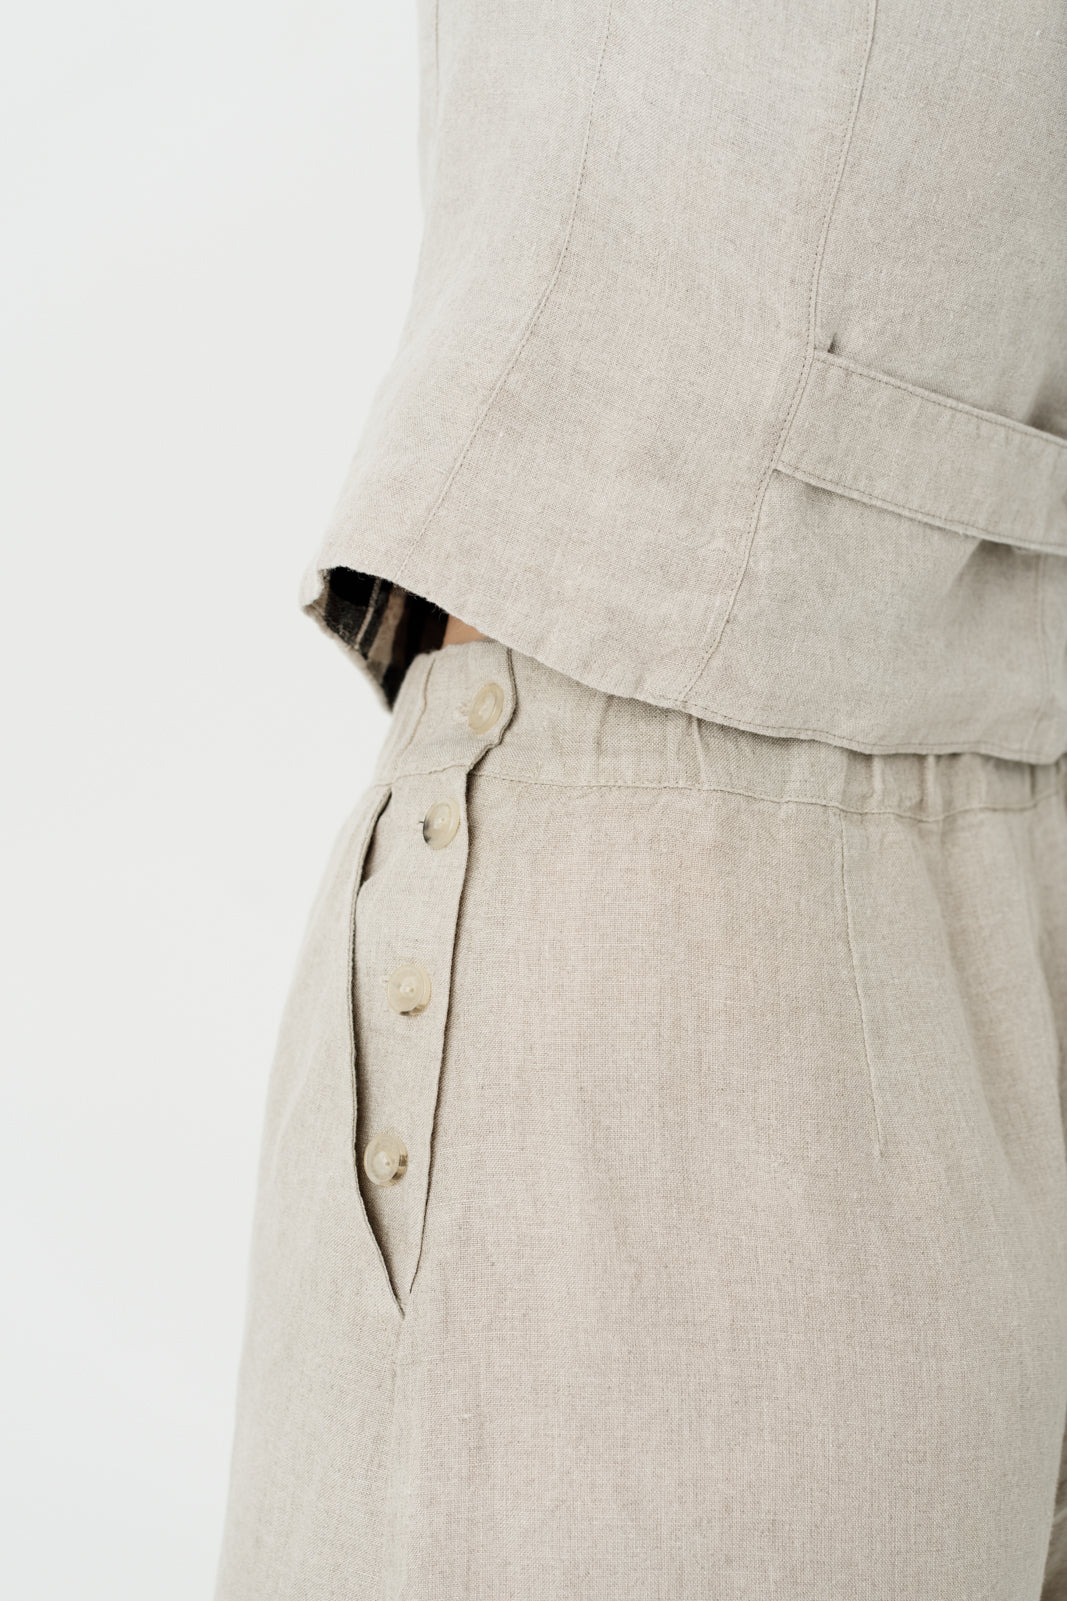 Maxi Catherine Trousers, Natural Linen